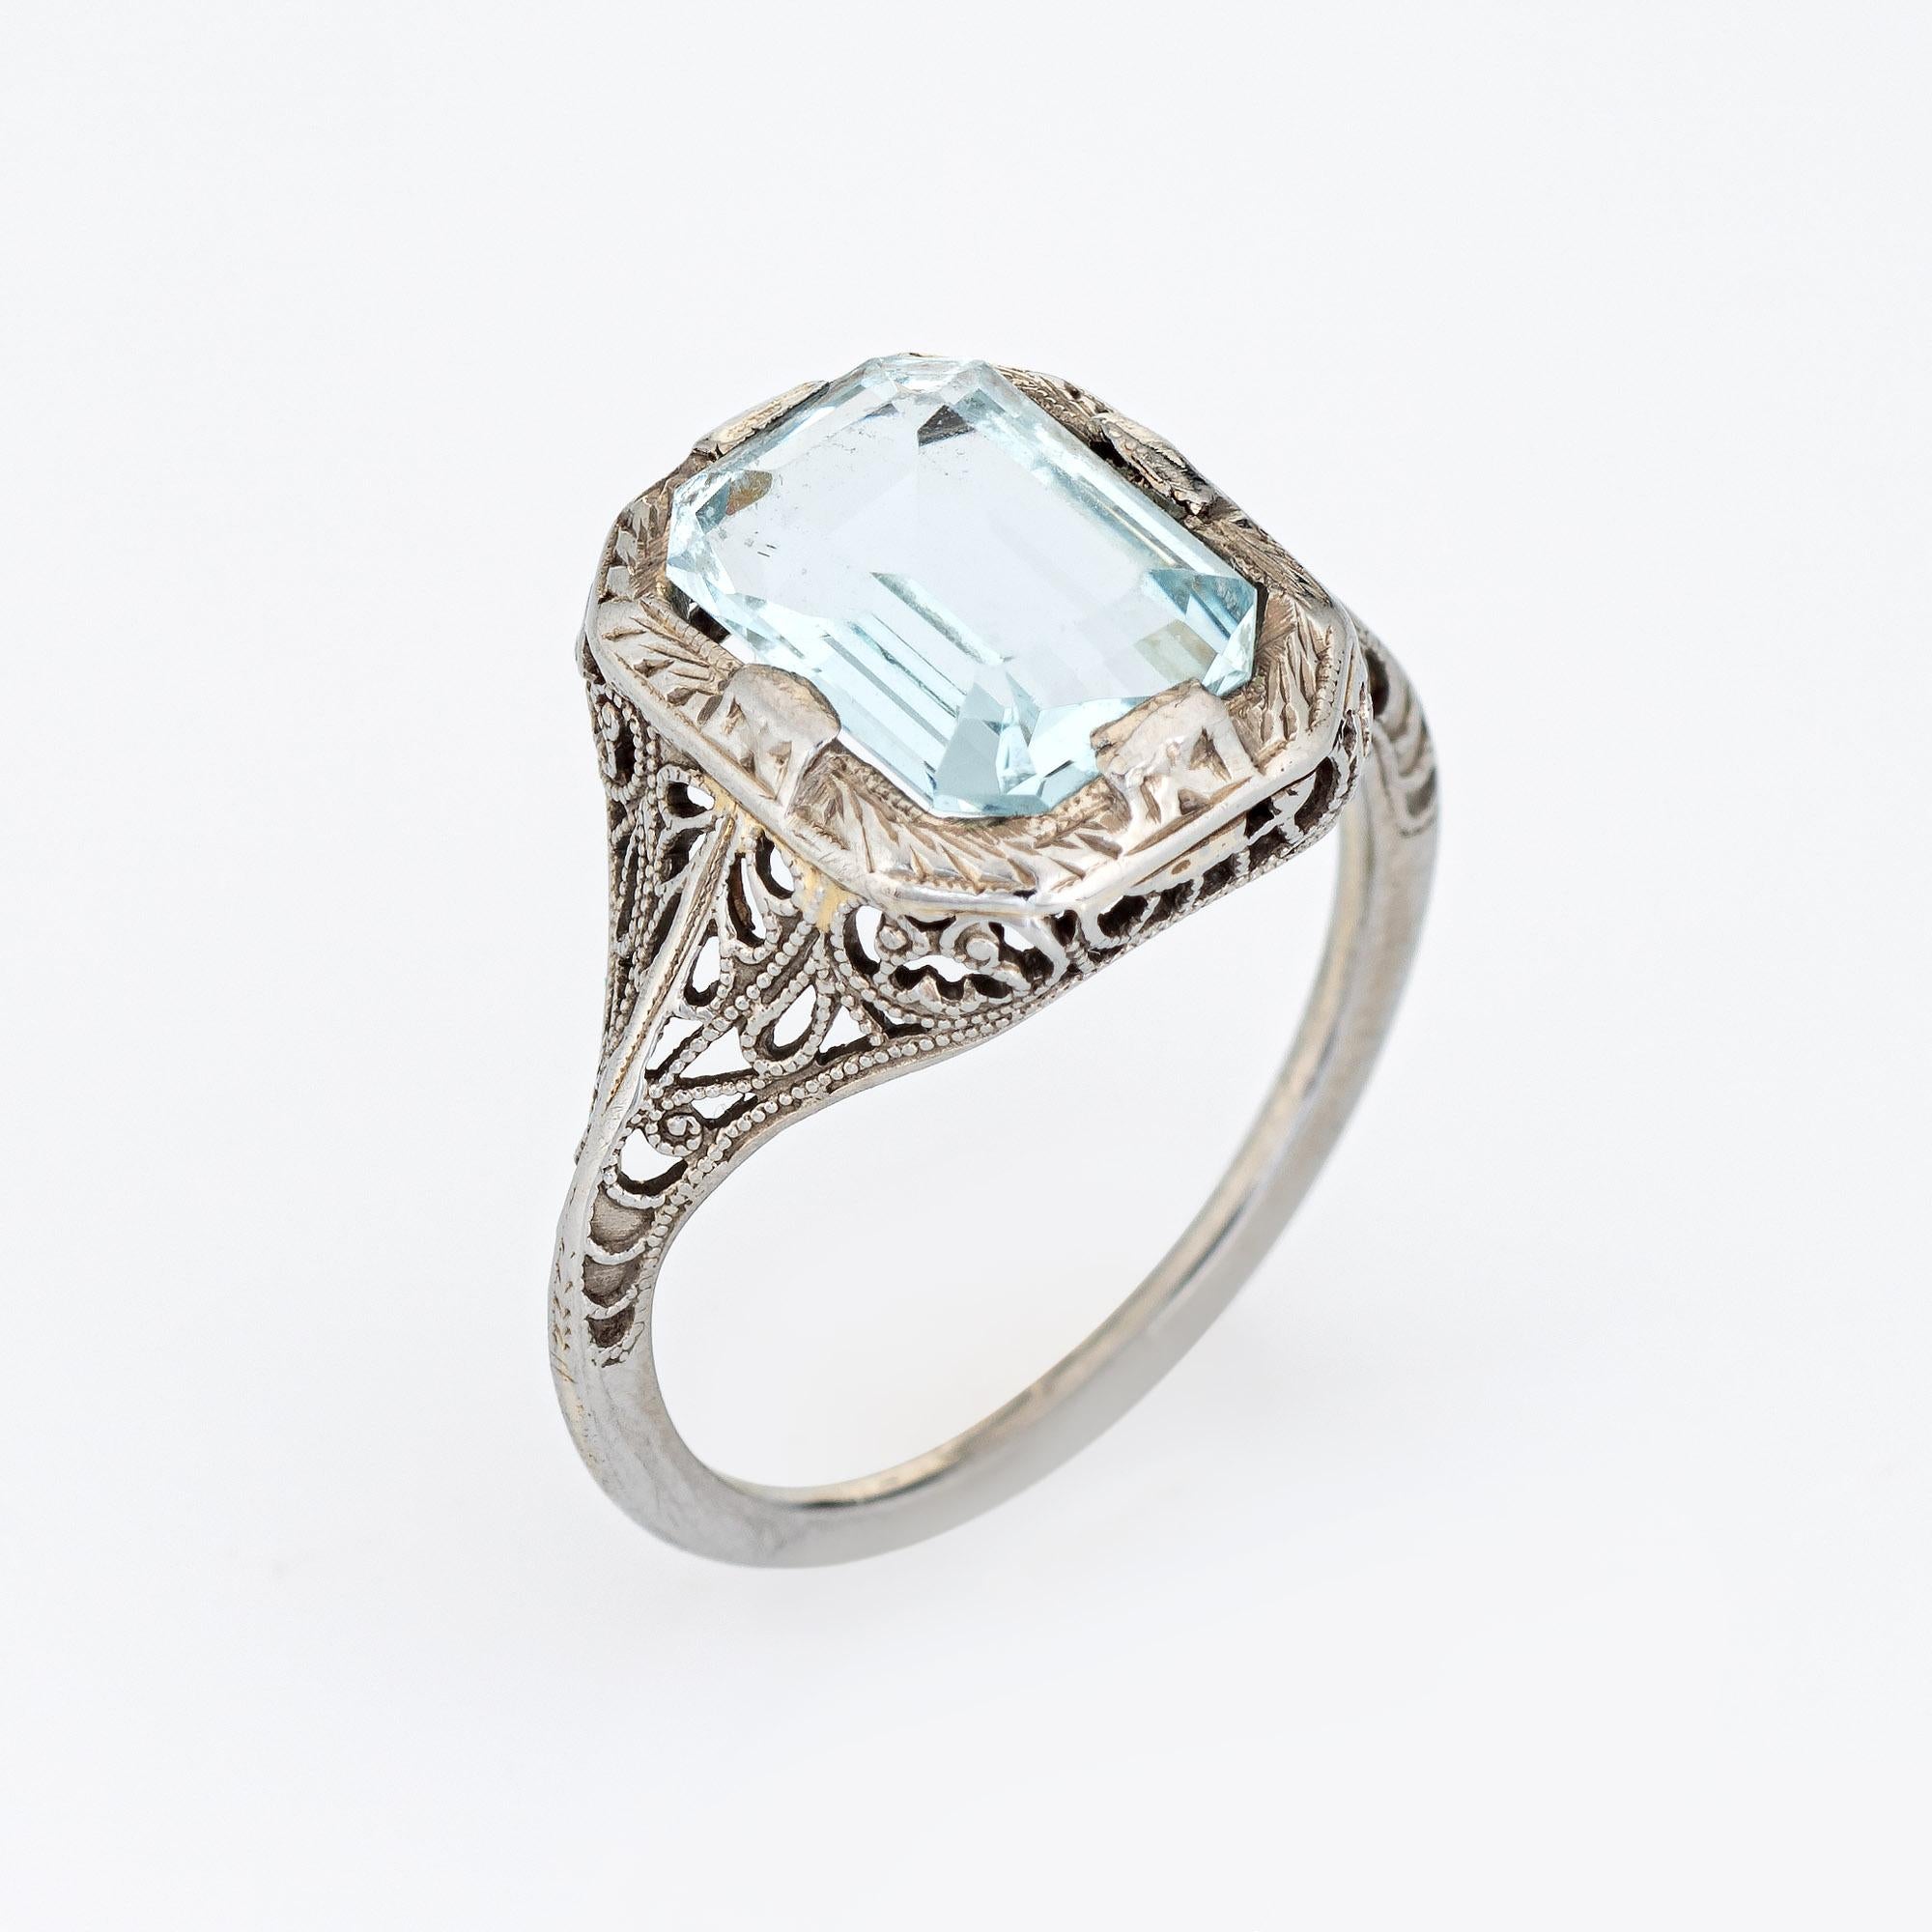 Finely detailed vintage Art Deco aquamarine filigree ring (circa 1920s to 1930s) crafted in 18 karat white gold. 

Aquamarine measures 10mm x 7mm (estimated at 2 carats). The aquamarine is in good condition with minor wear evident under a 10x loupe.